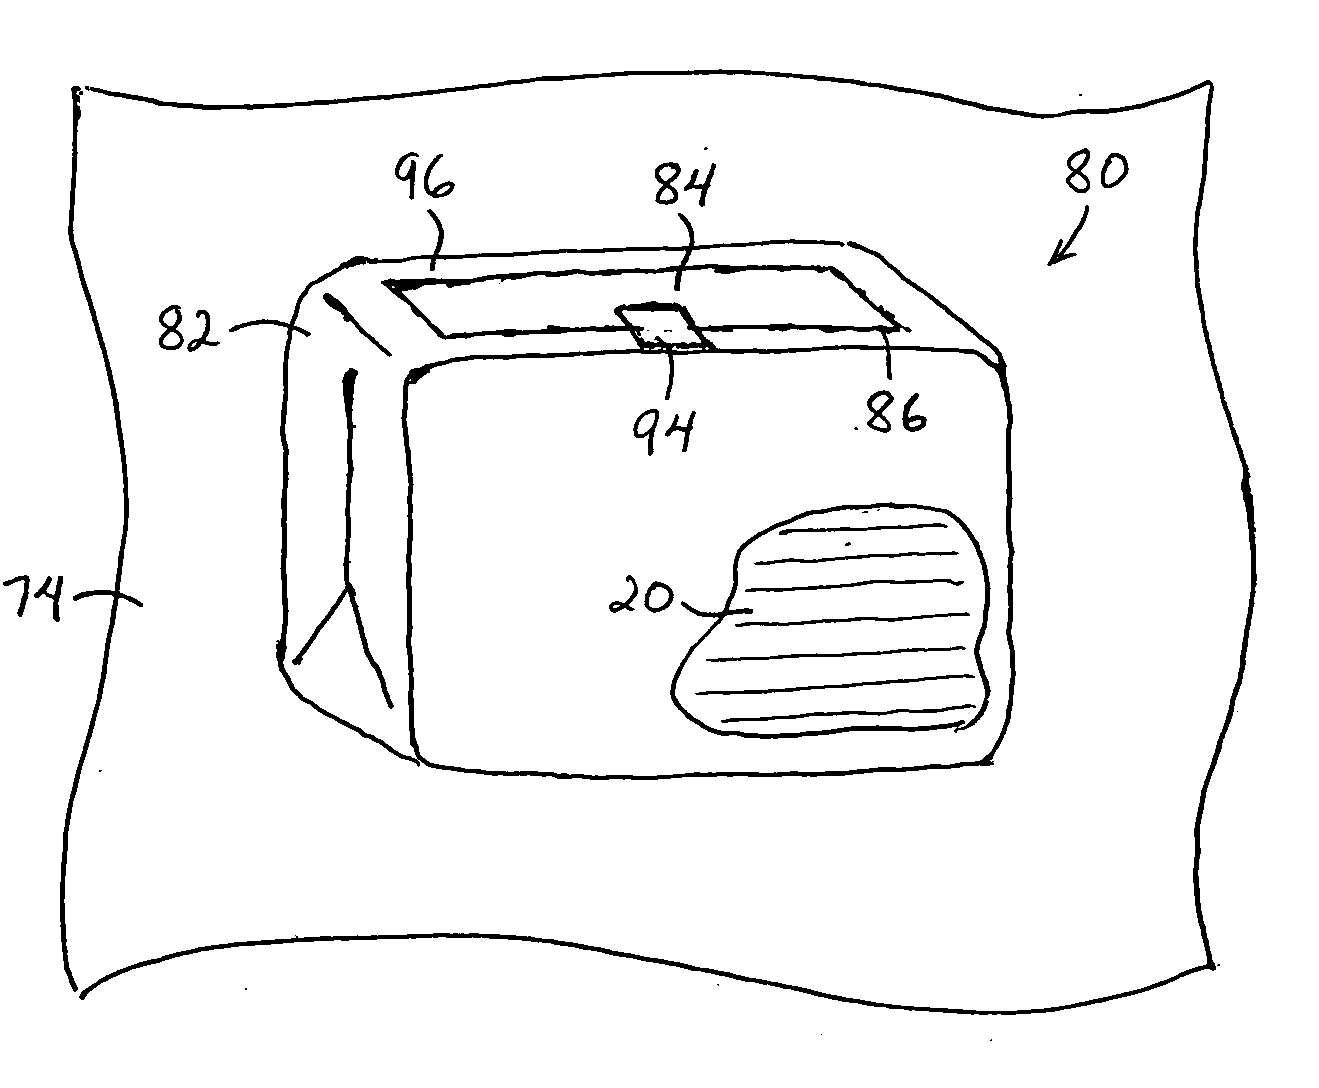 Disposable package with a repositioning attachment feature